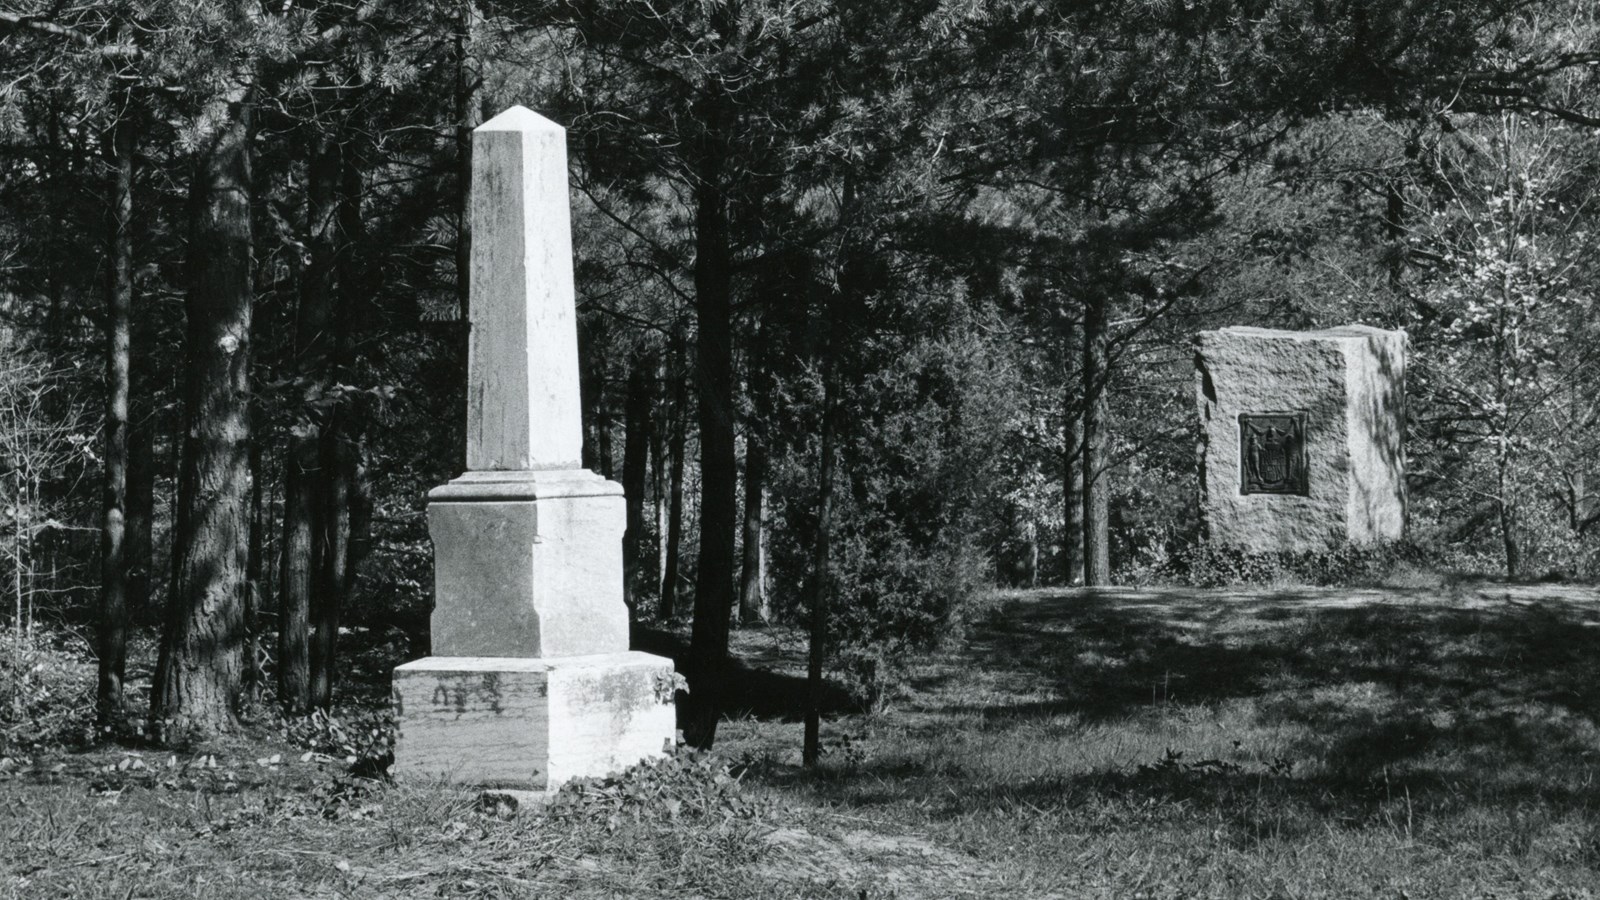 In the foreground the narrow Delaware Plinth contrasts the large squat Maryland monument behind it.